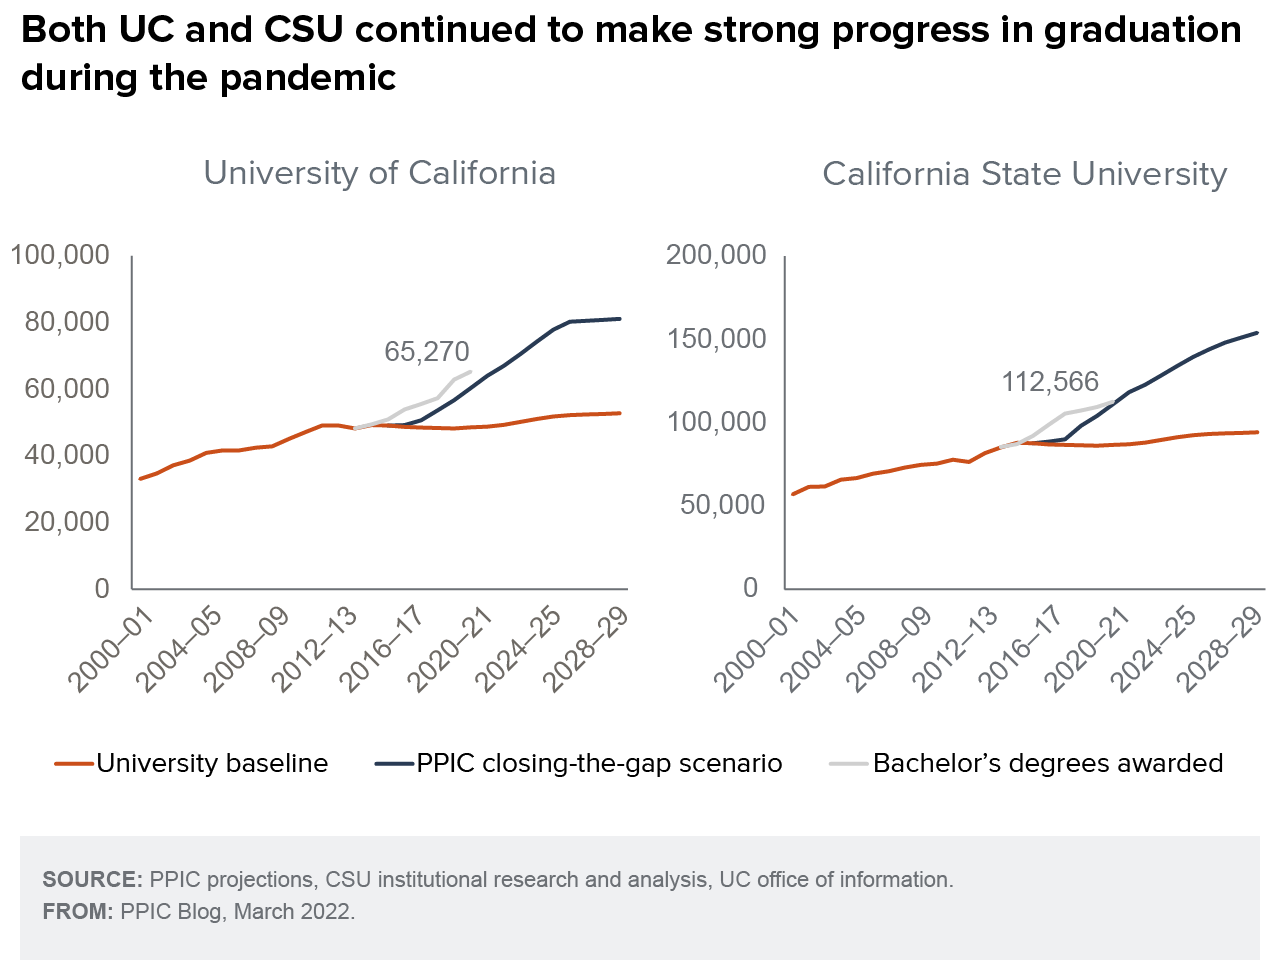 figure - Both UC and CSU continued to make strong progress in graduation during the pandemic